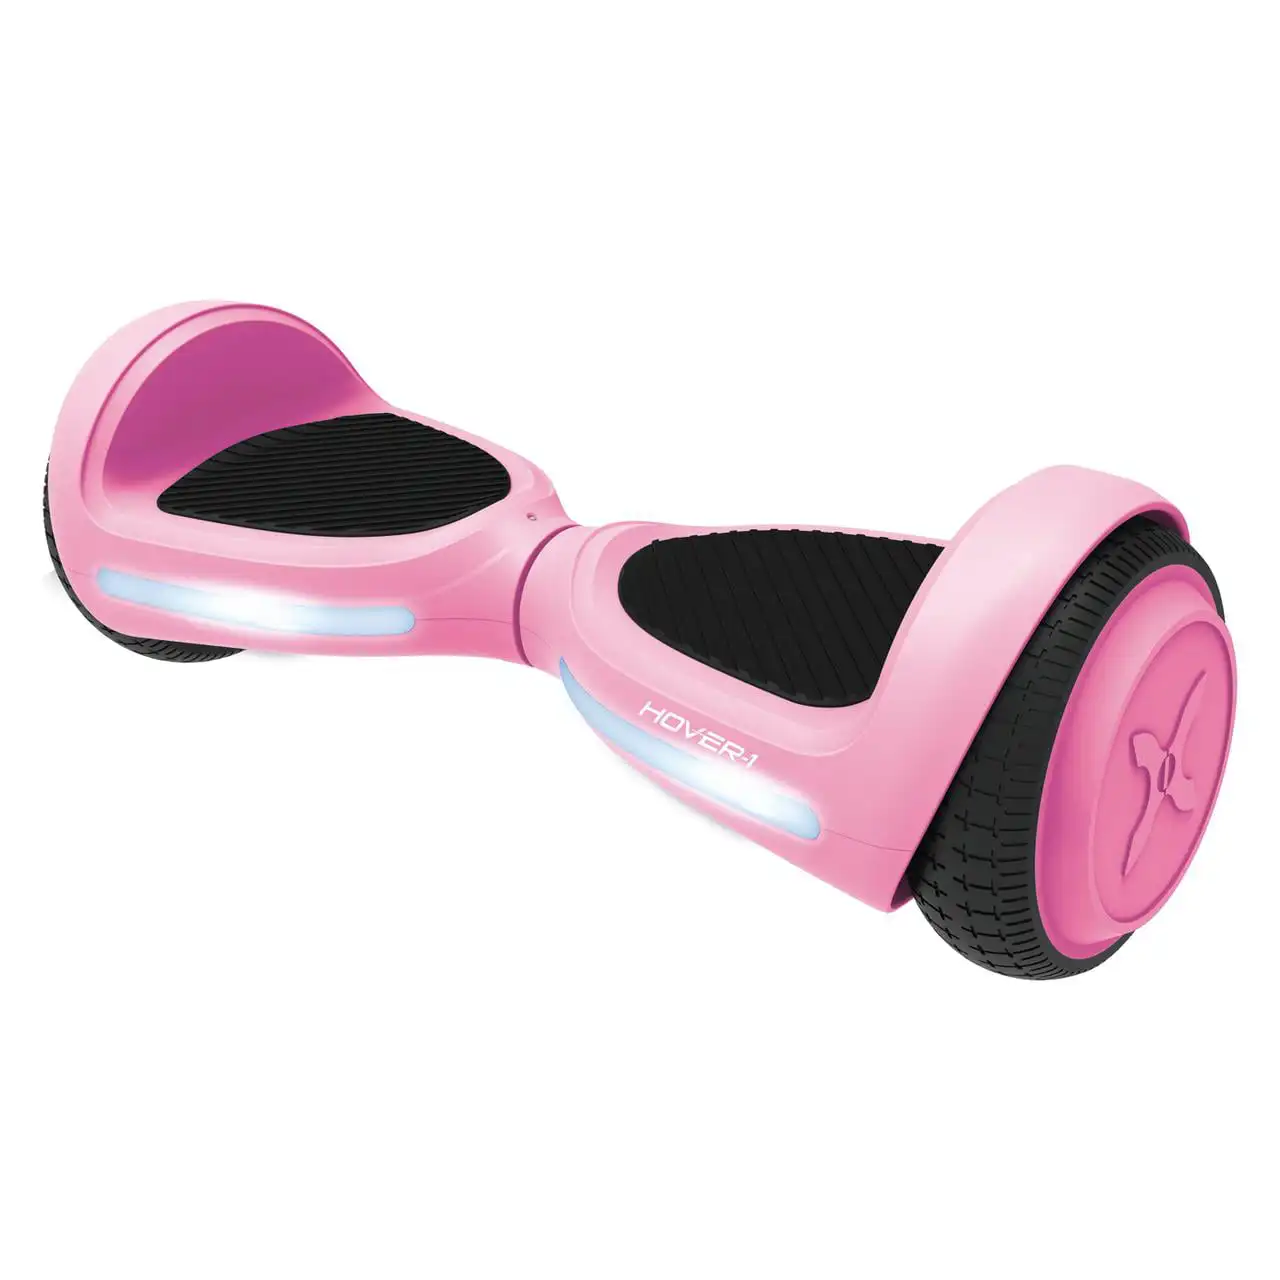 My First Hoverboard Kids Hoverboard w/ LED Headlights, 5 MPH Max Speed, 80 lbs Max Weight, 3 Miles Max Distance - Pink